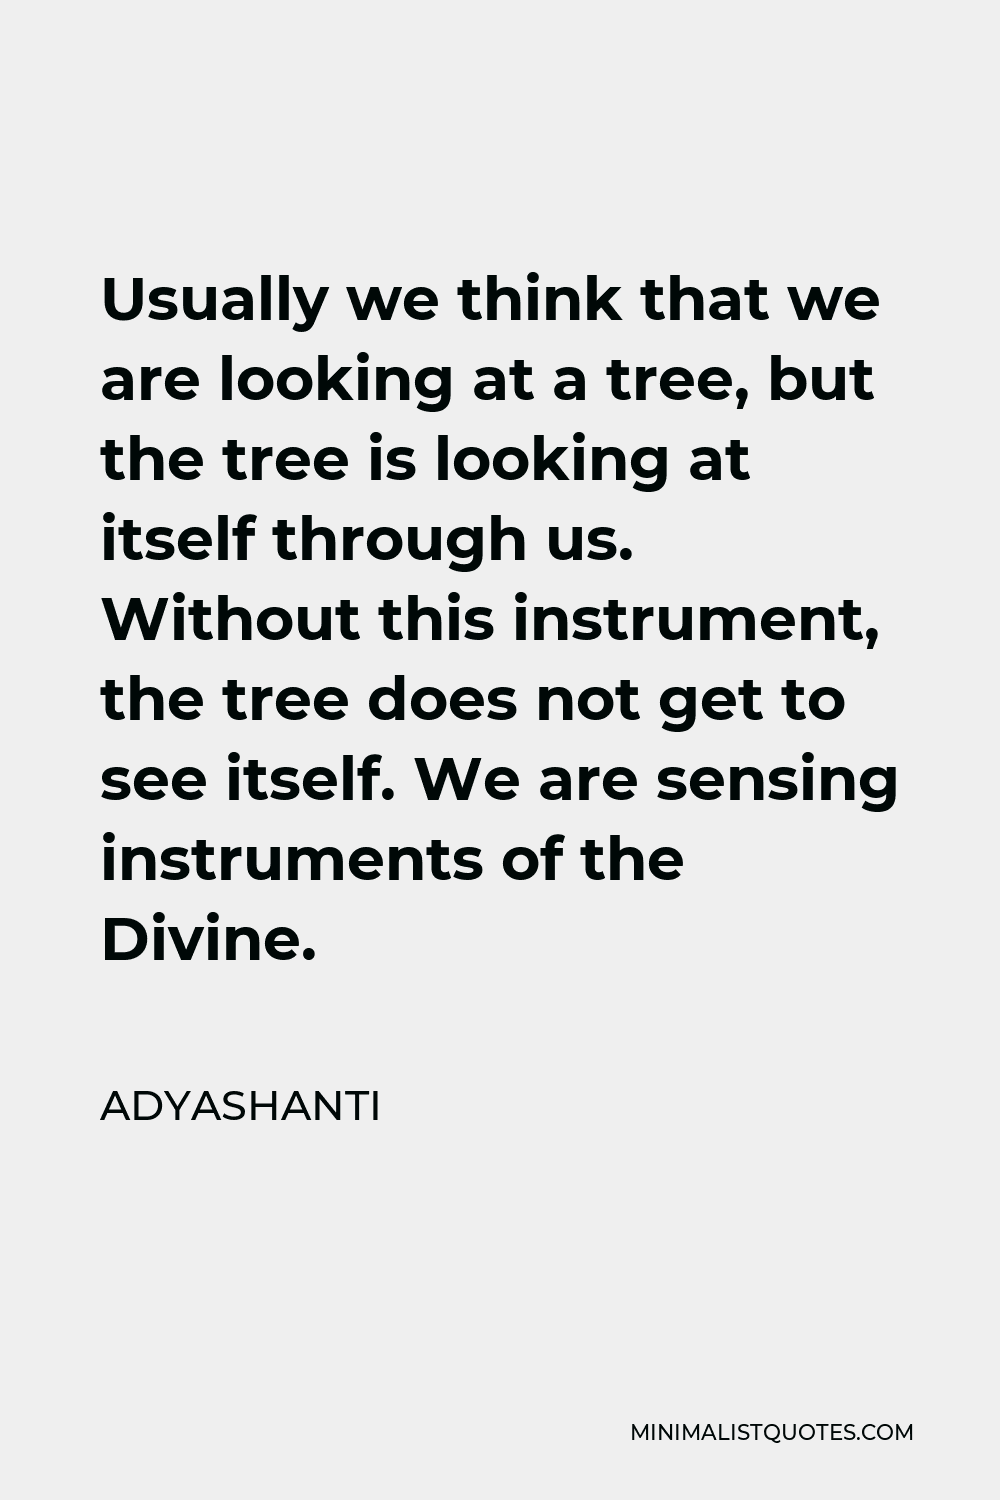 Adyashanti Quote - Usually we think that we are looking at a tree, but the tree is looking at itself through us. Without this instrument, the tree does not get to see itself. We are sensing instruments of the Divine.